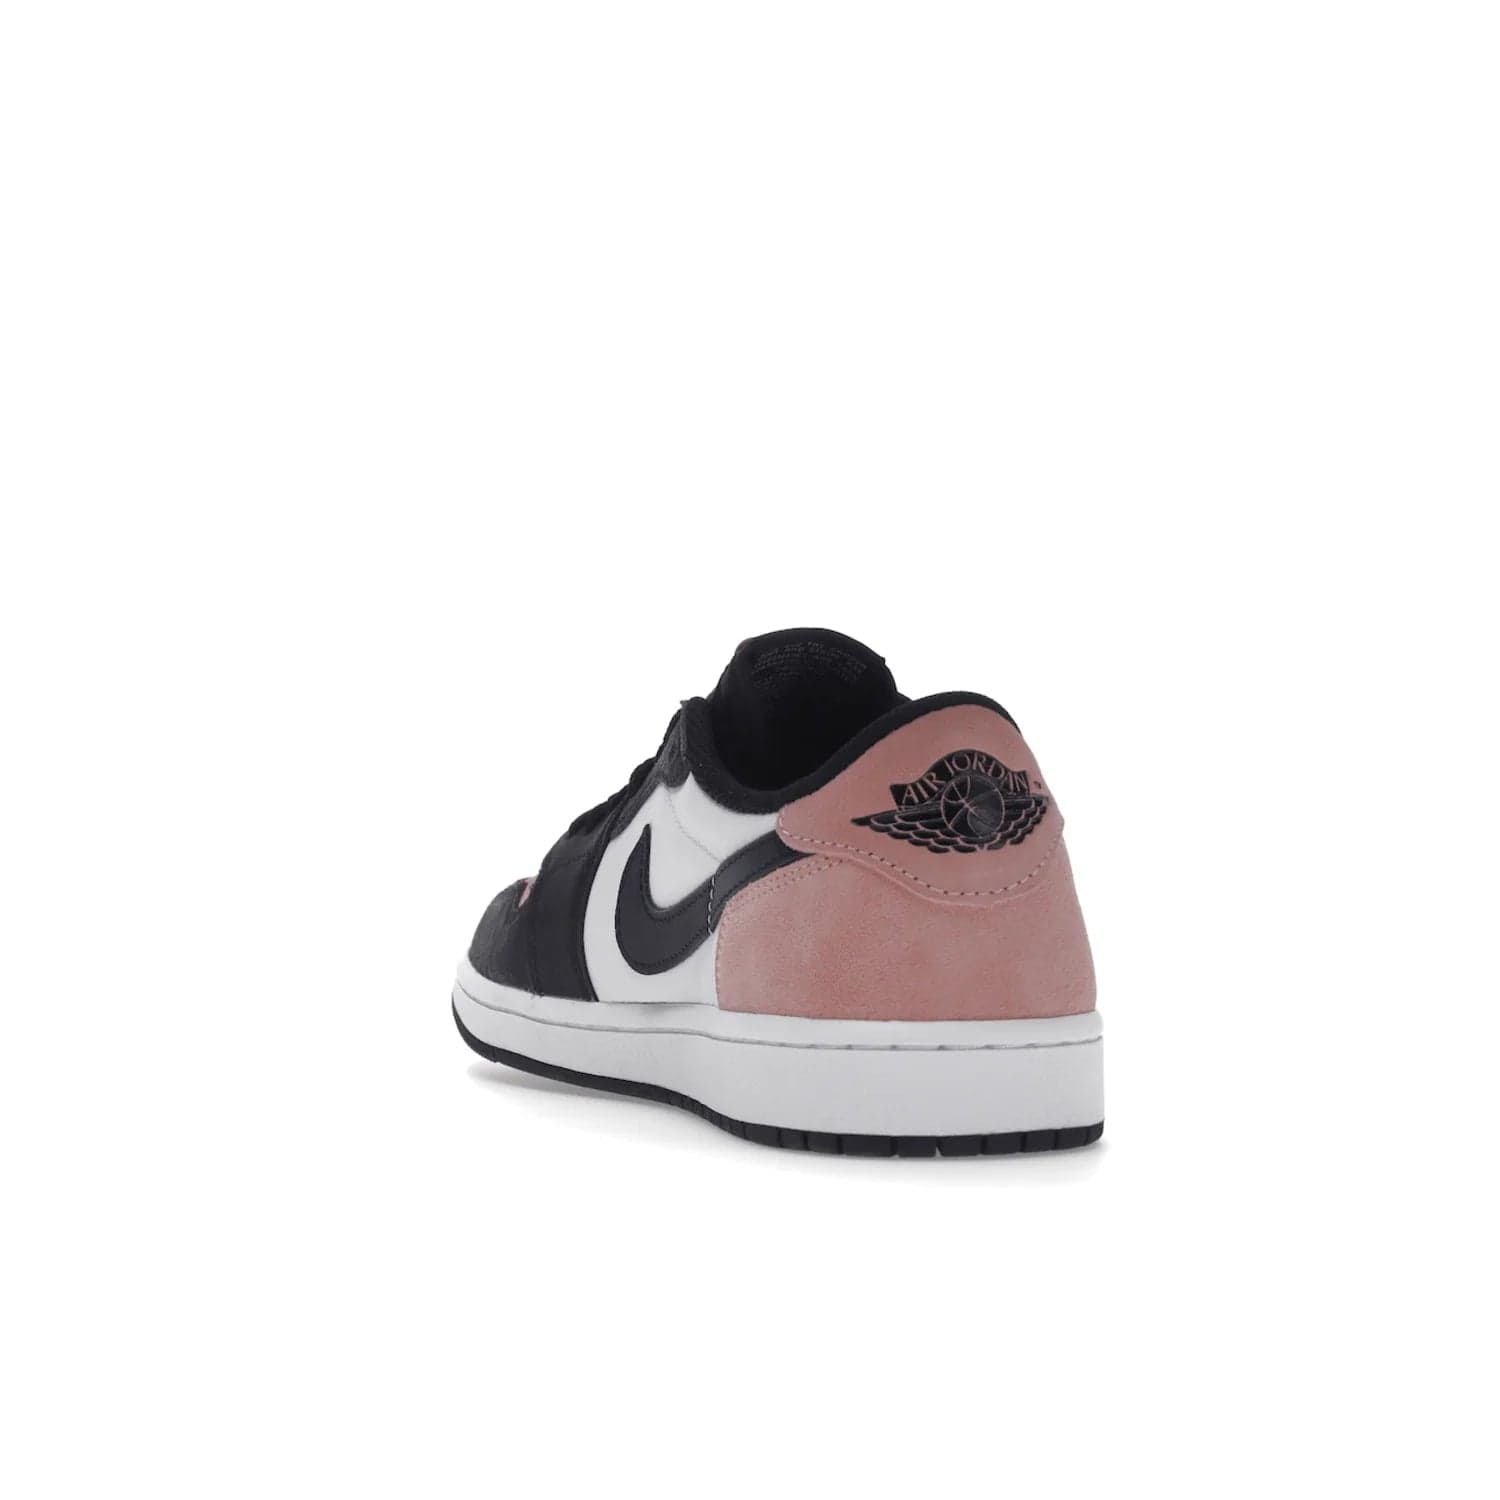 Jordan 1 Low OG Bleached Coral - Image 26 - Only at www.BallersClubKickz.com - Introducing the Air Jordan 1 Low OG Bleached Coral. Constructed with white leather, black cracked leather & Bleached Coral suede. Signature Jordan Wings logo, white Air sole. Get the pack in July 2022 and stand out.